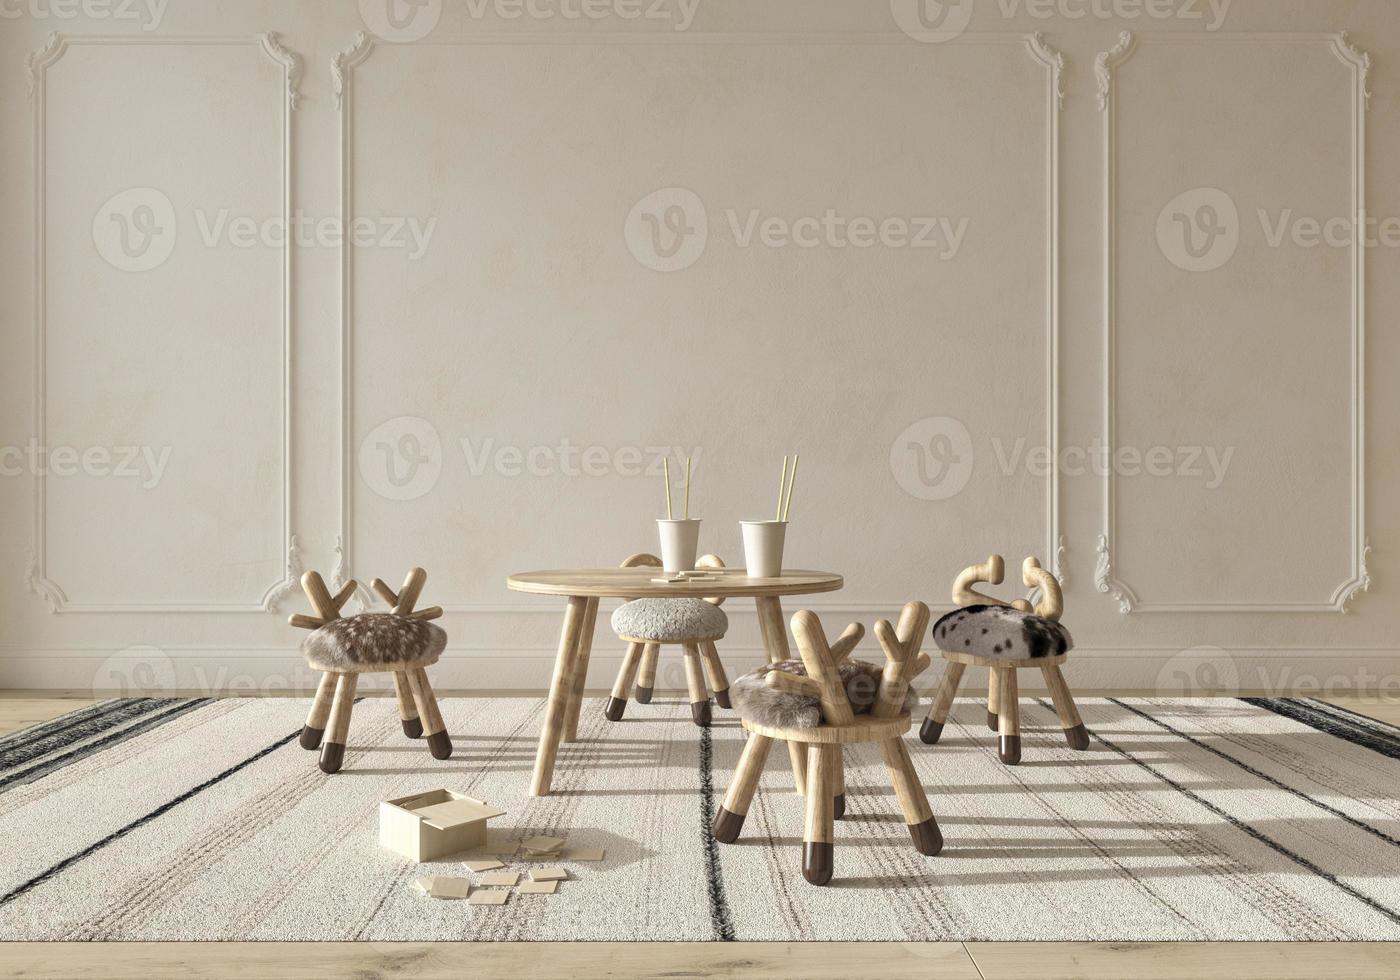 Children room interior scandinavian style with natural wooden furniture. Mock up on wall background. Kids farmhouse style 3d rendering illustration. photo